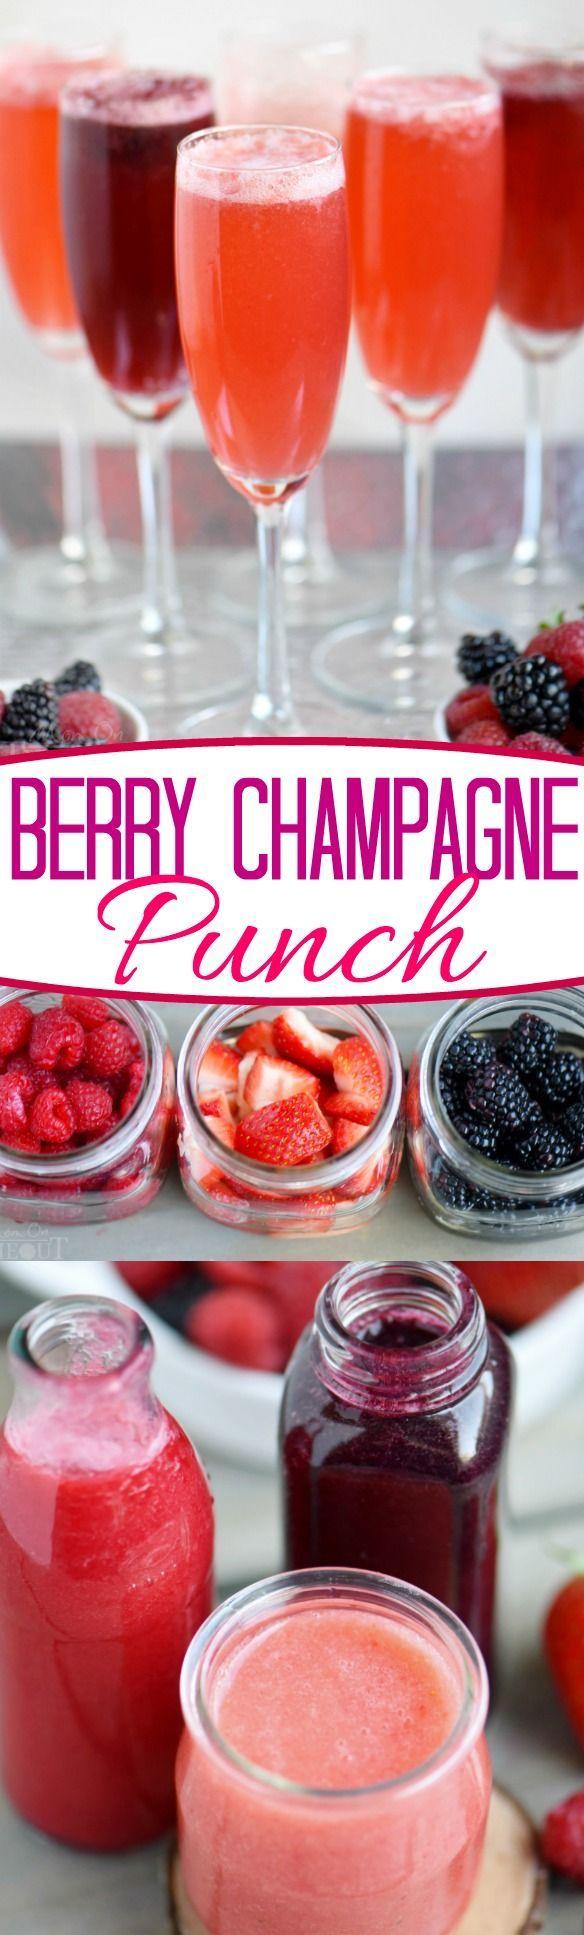 Wedding - Berry Champagne Punch